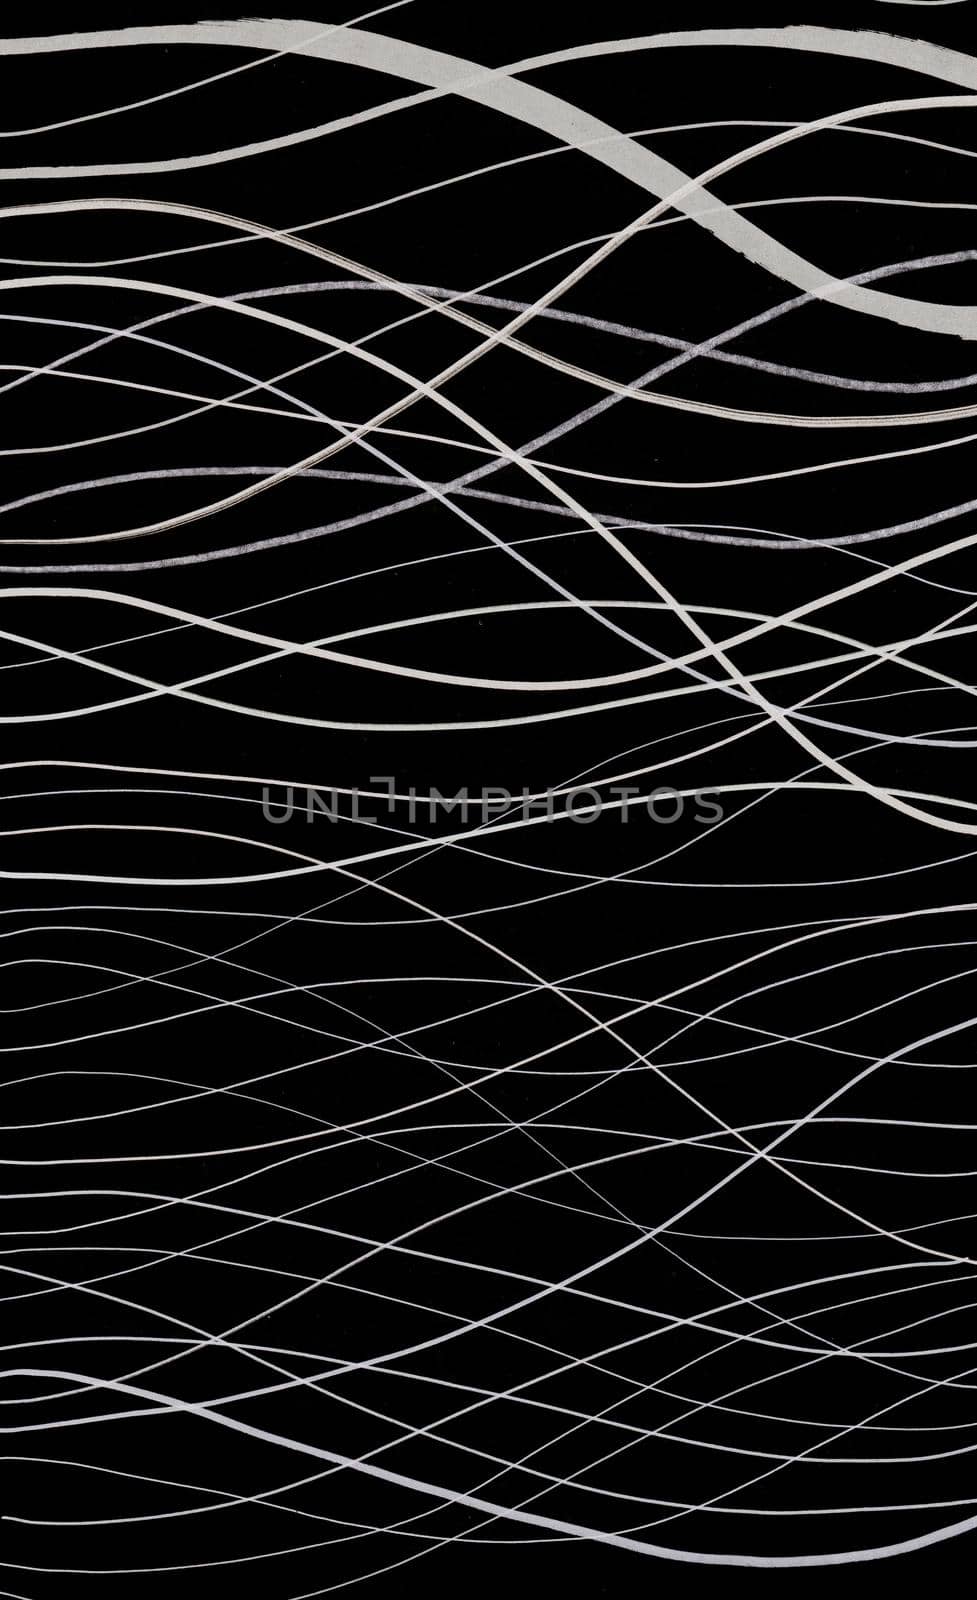 Abstract Marker Hand Drawn Background Texture. Background Illustration Wavy Lines in Doodle Style Hand Drawn Sketch Art. White Waves on Black Background.